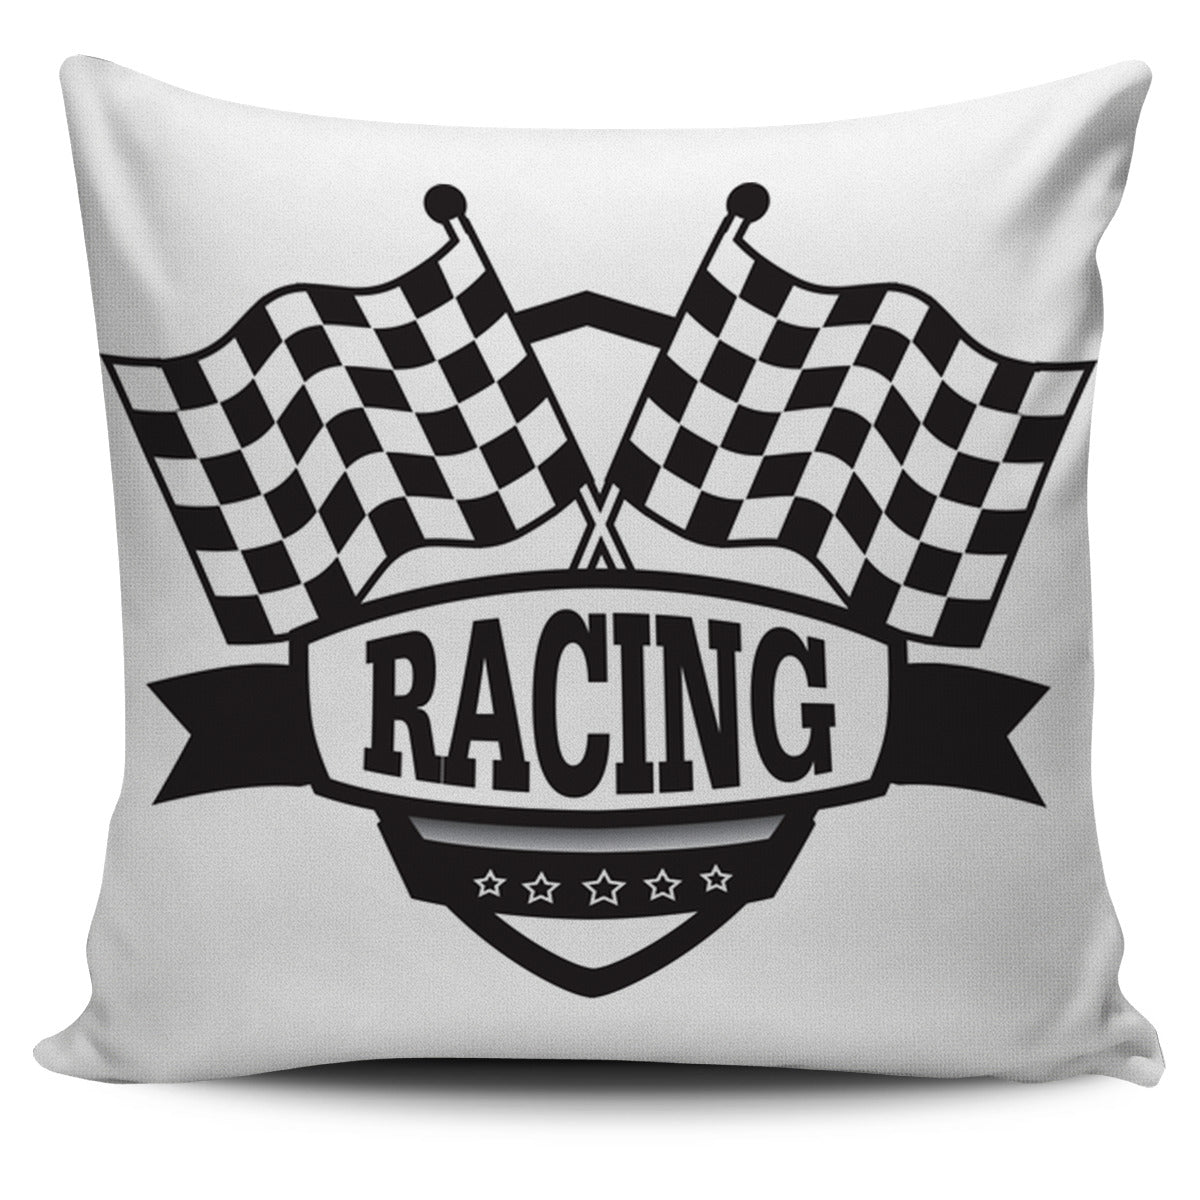 Racing Pillow Cover V13